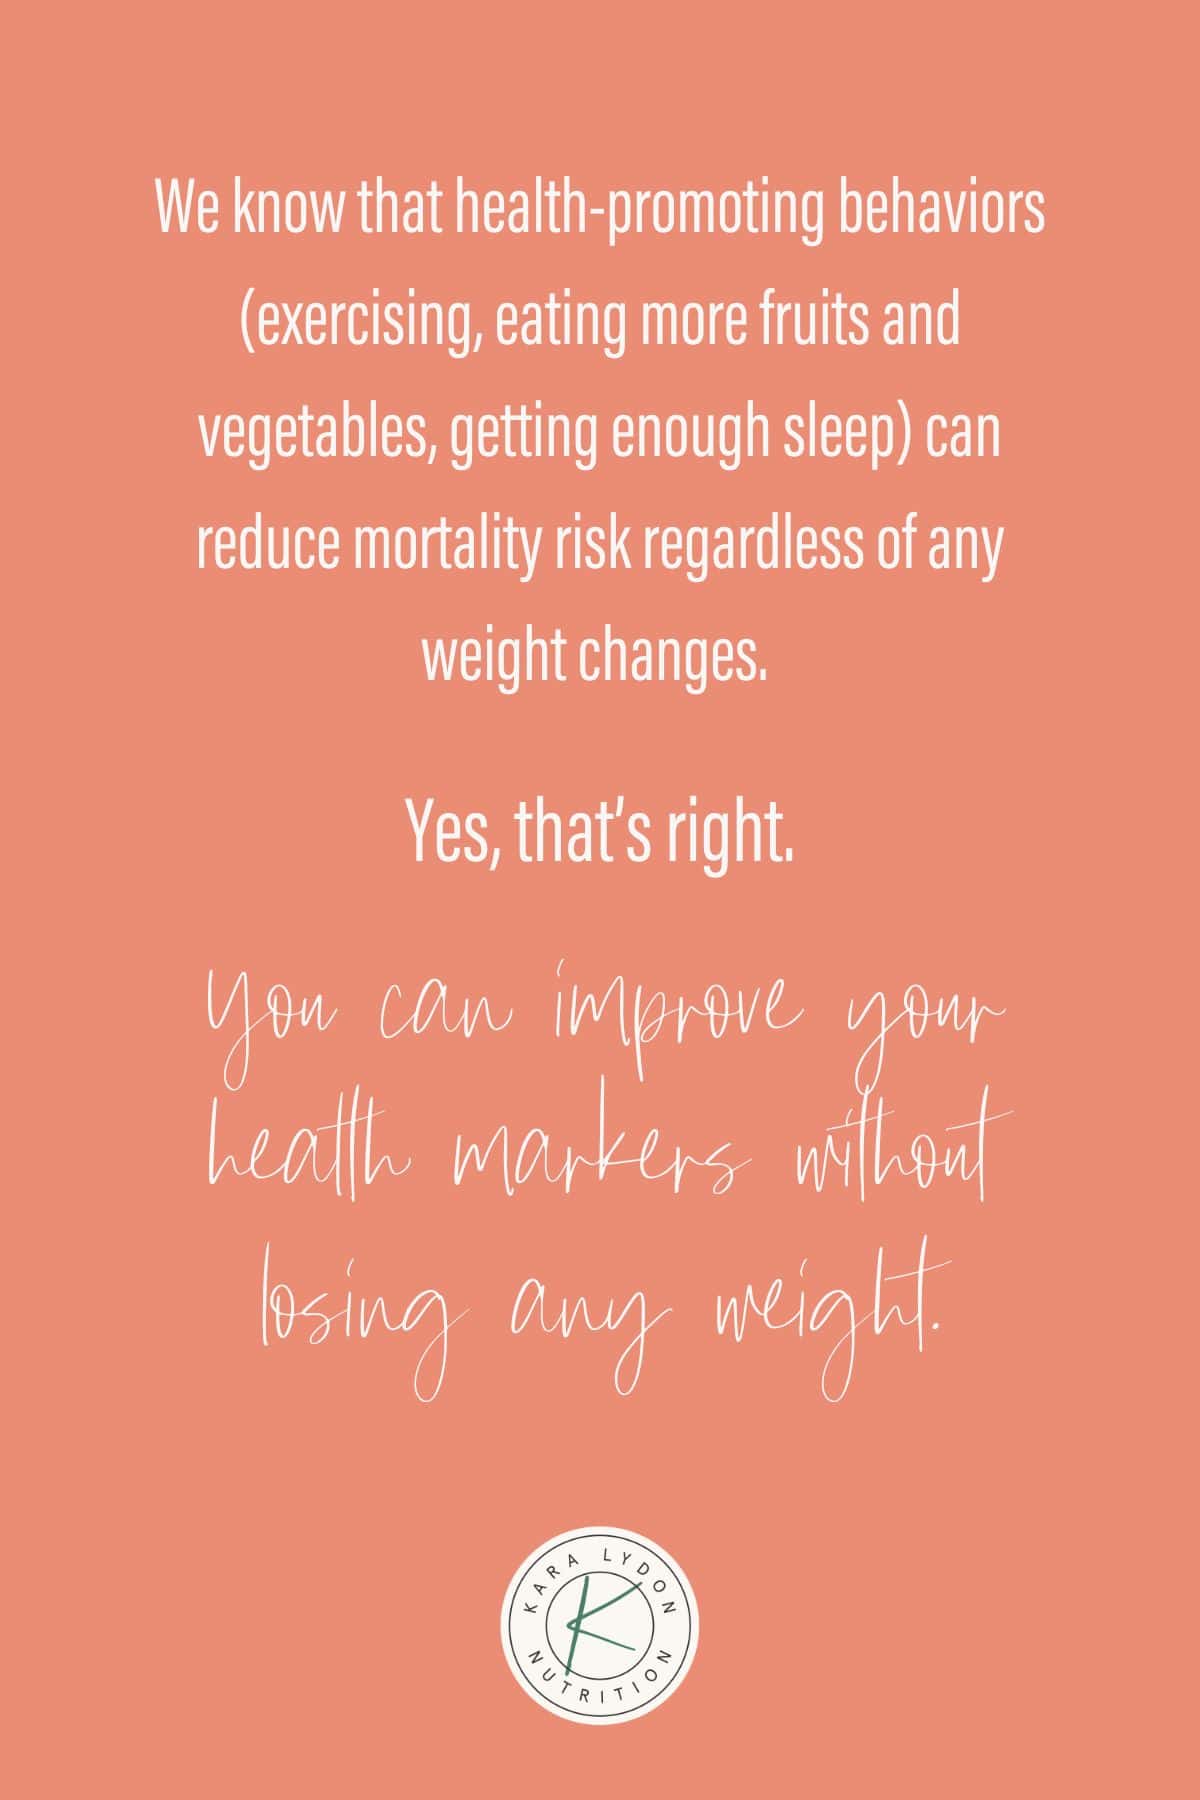 Graphic with quote: "We know that health-promoting behaviors (exercising, eating more fruits and vegetables, getting enough sleep) can reduce mortality risk regardless of any weight changes. Yes, that's right. You can improve your health markers without losing any weight."